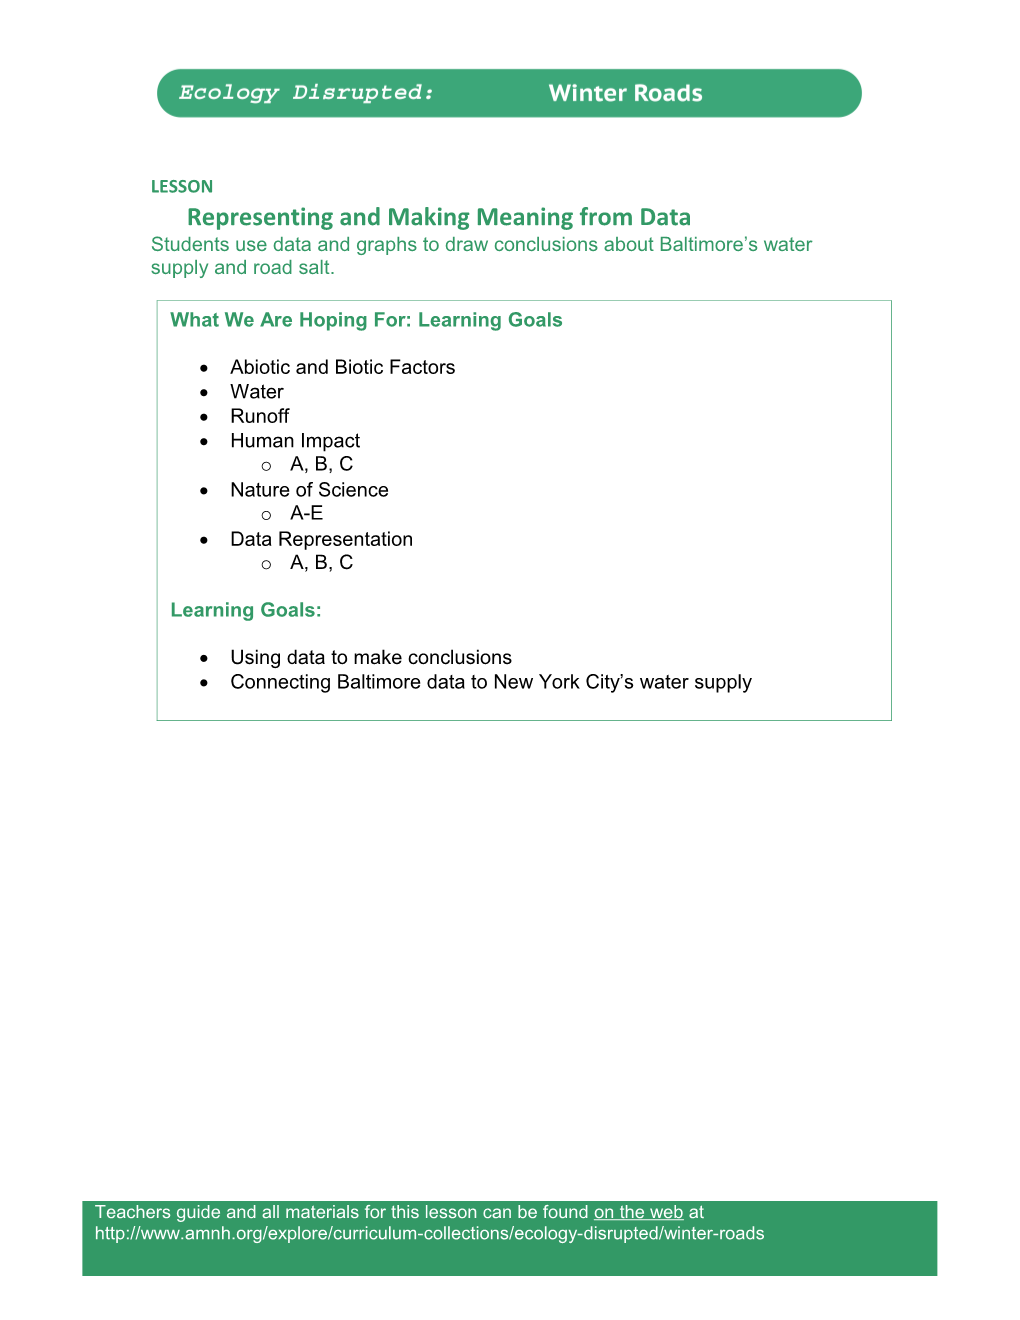 Lesson Representing and Making Meaning from Data